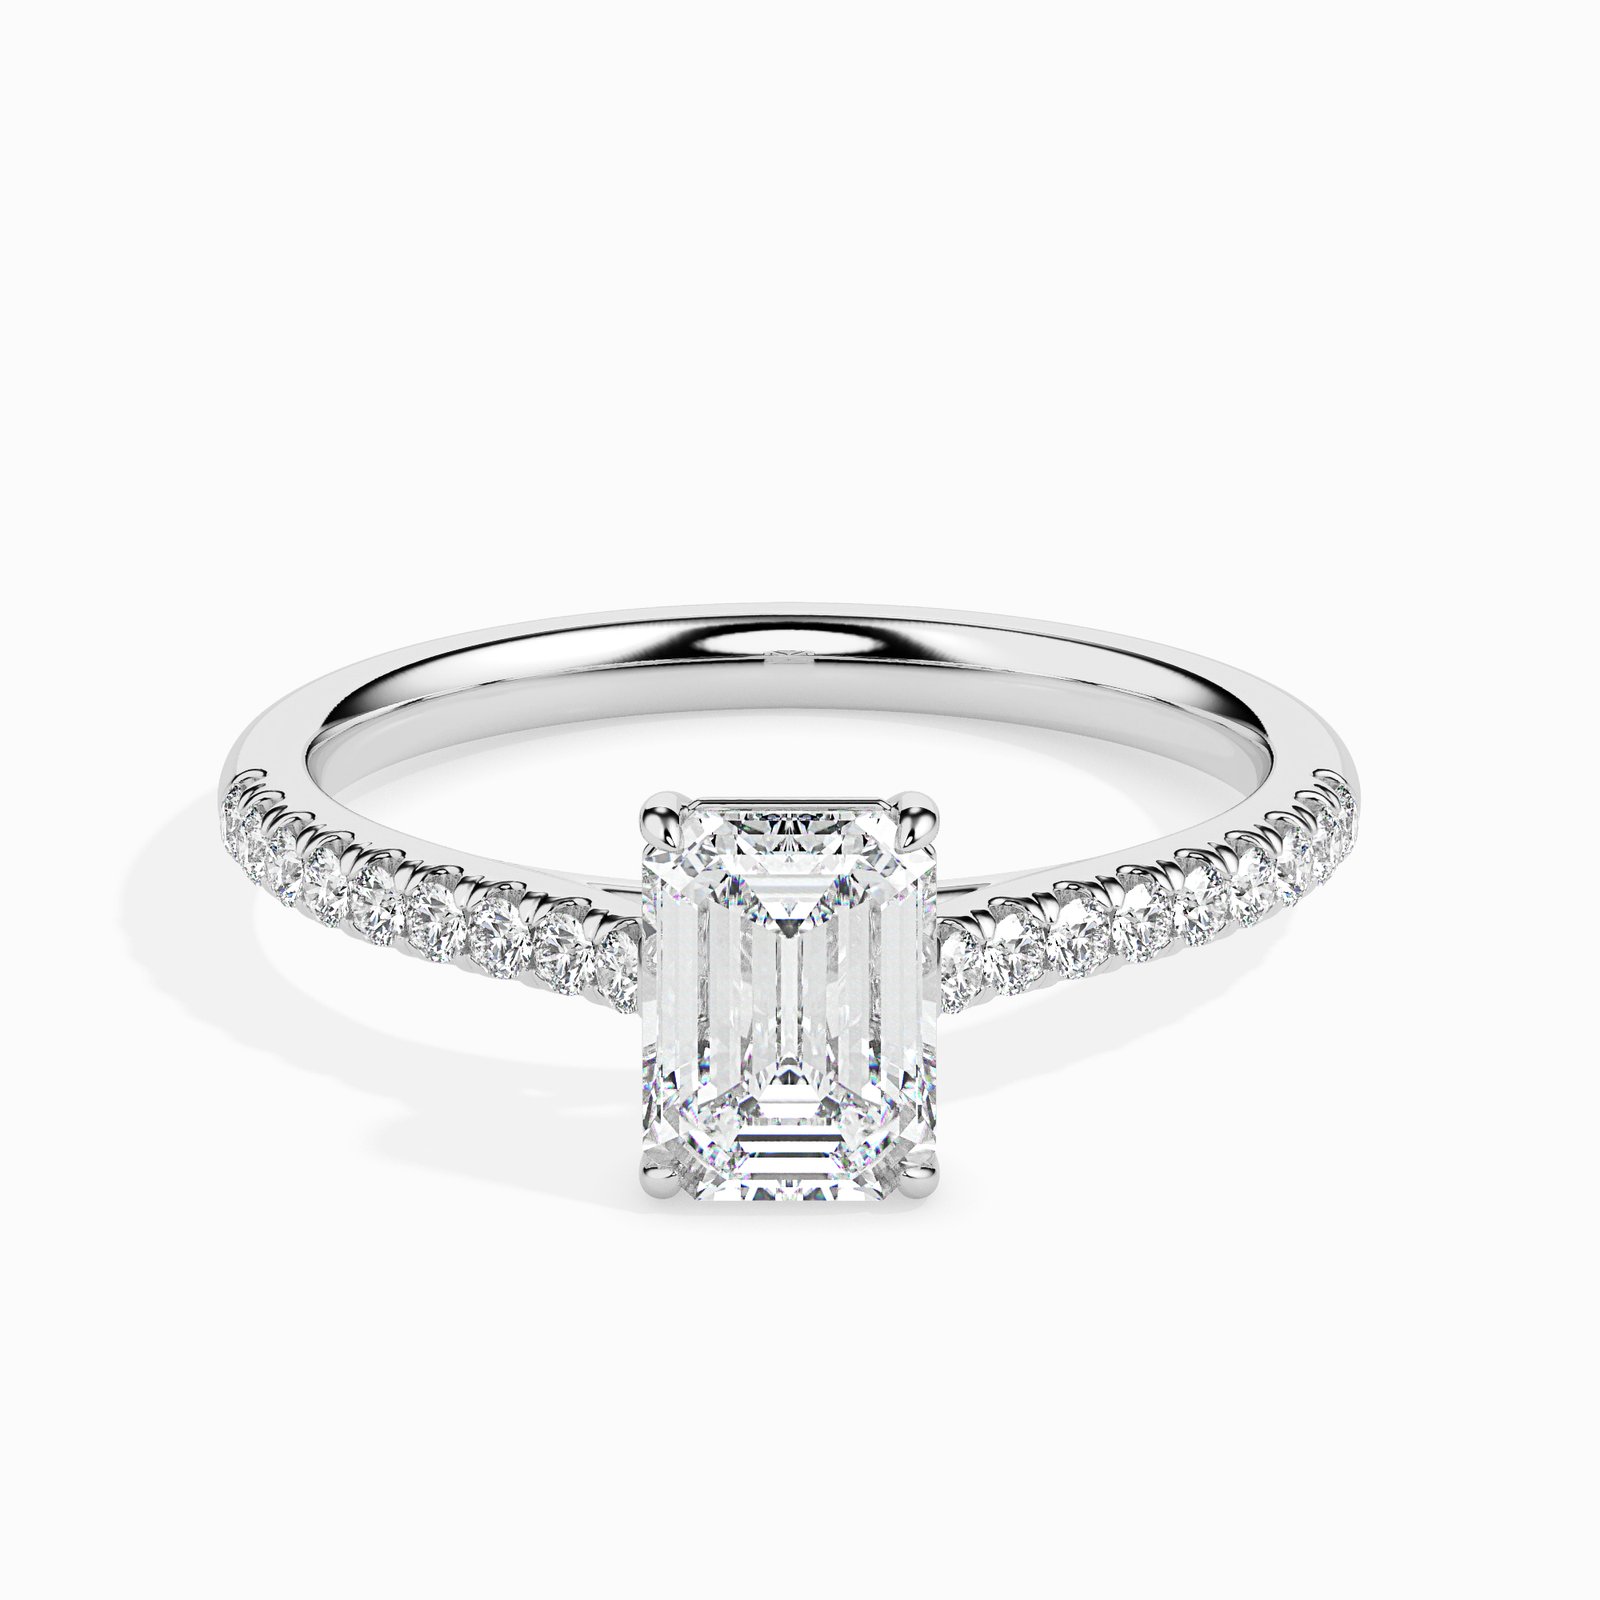 Emerald Cut Engagement Rings | Made in Australia